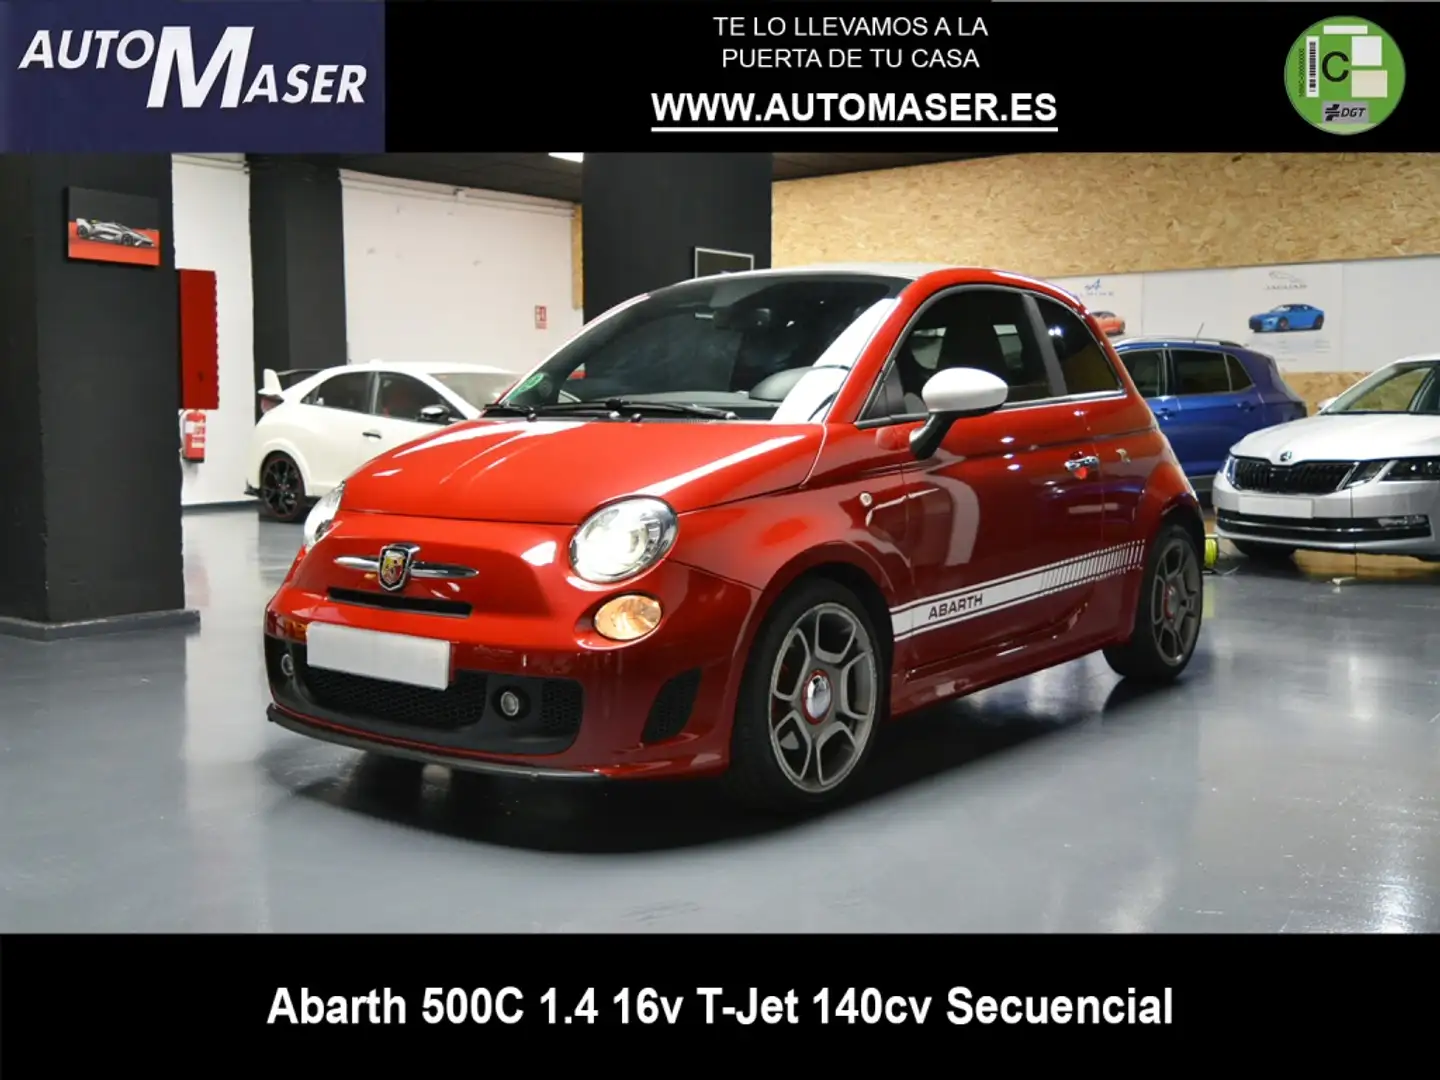 Abarth 500 500C 1.4T JET SECUENCIAL 140 Rosso - 1